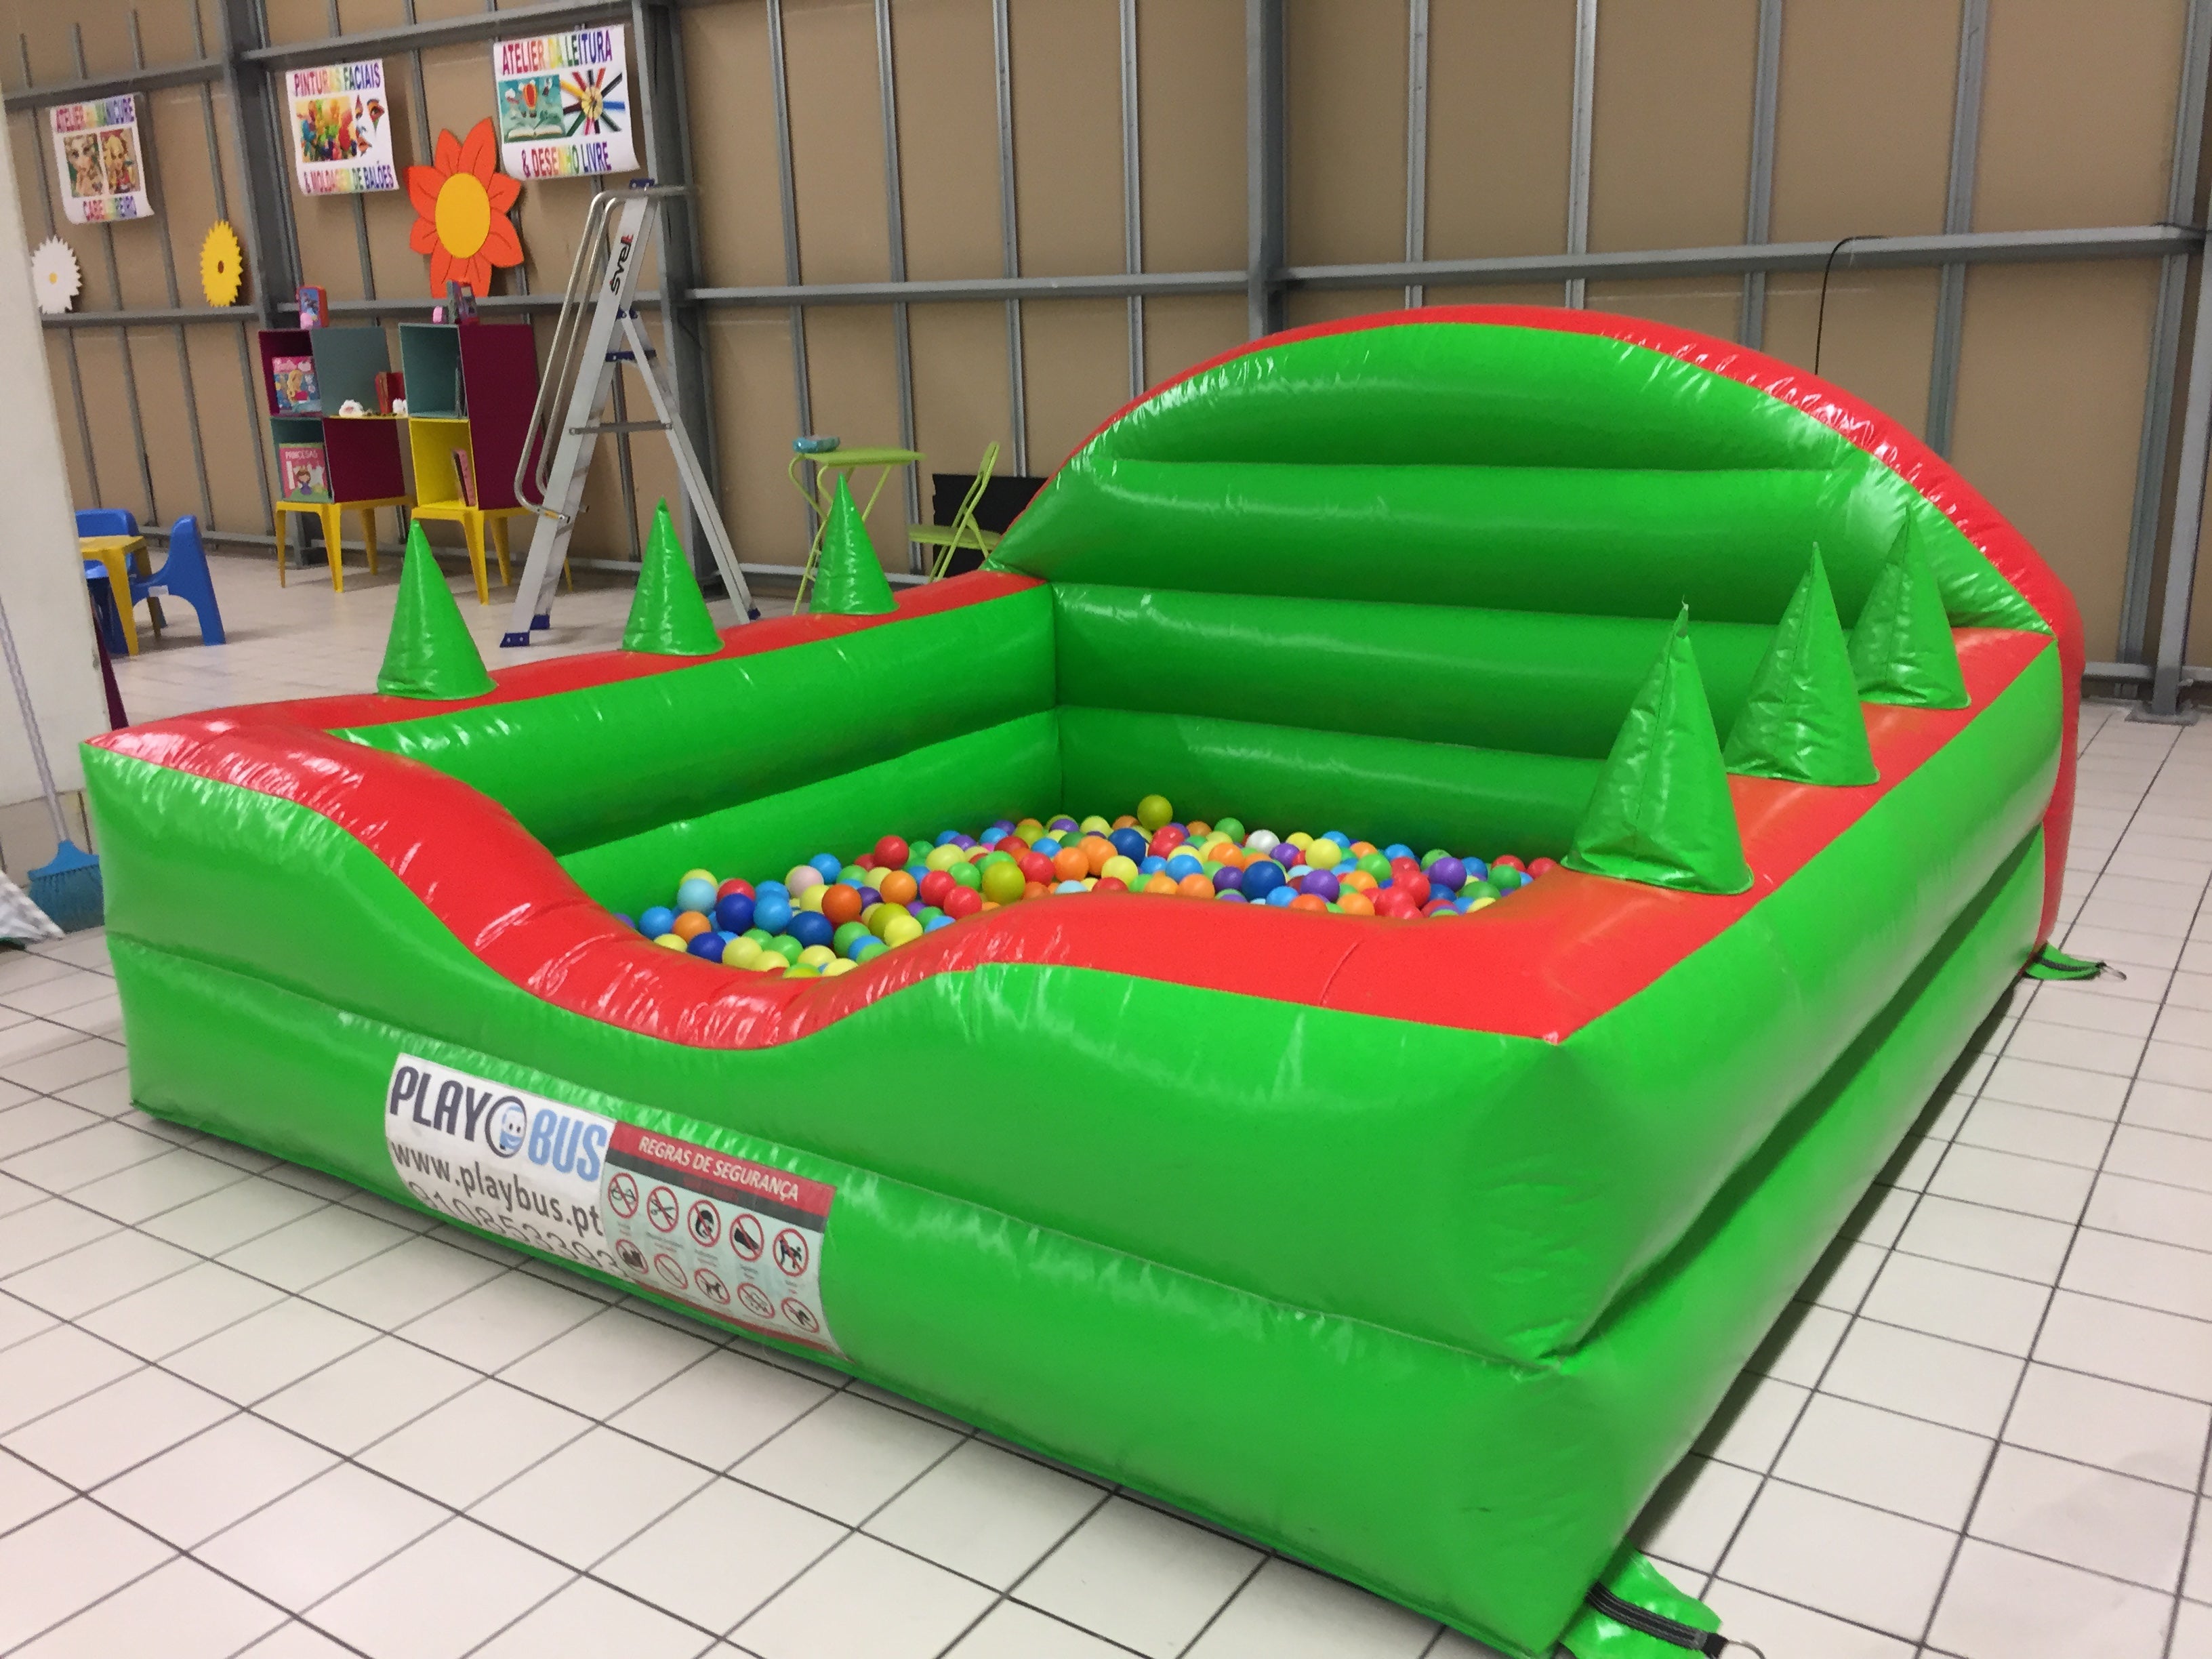 Square ball pit